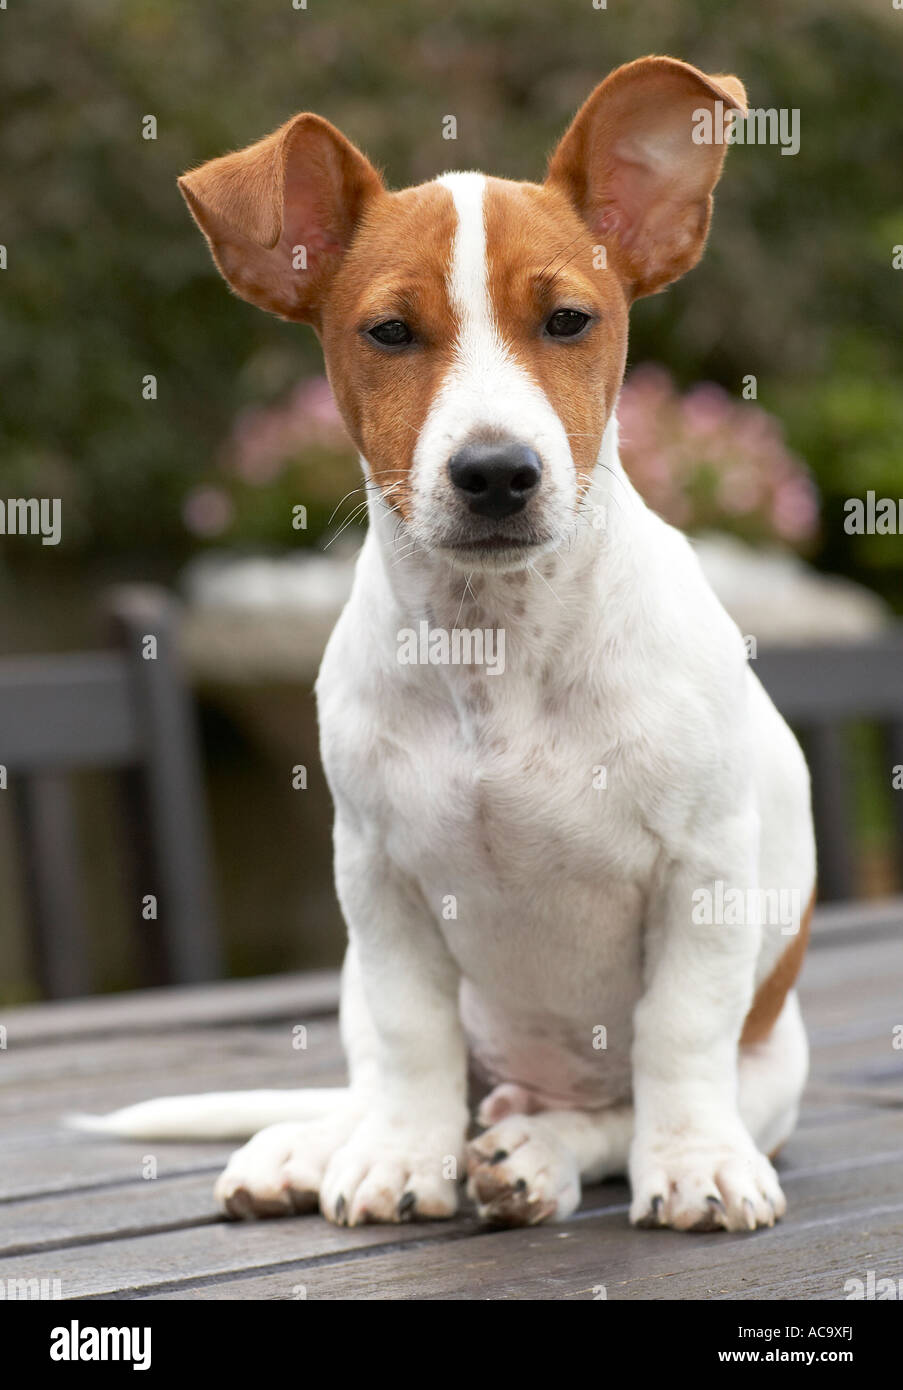 Jack the Jack Russell Terrier Stock Photo